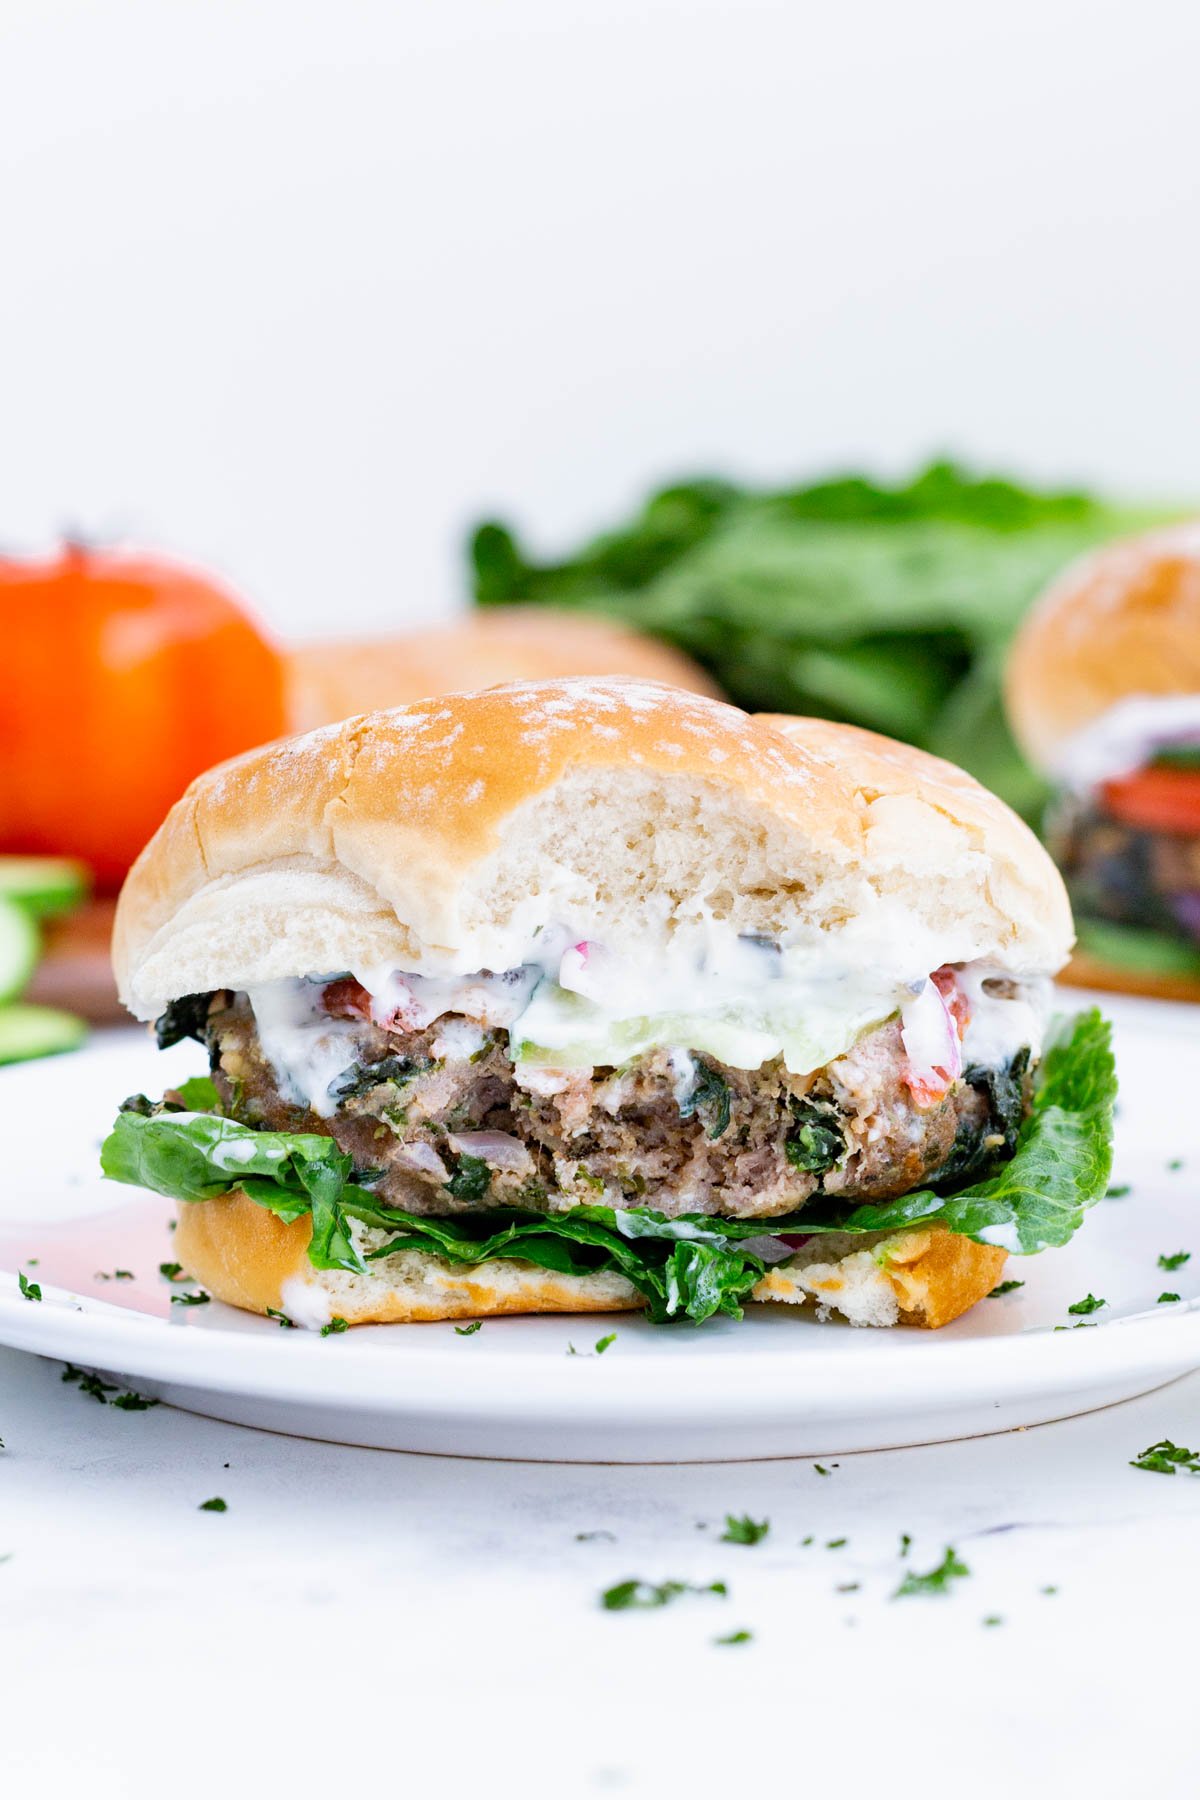 Greek turkey burgers are healthy and so full of flavor.